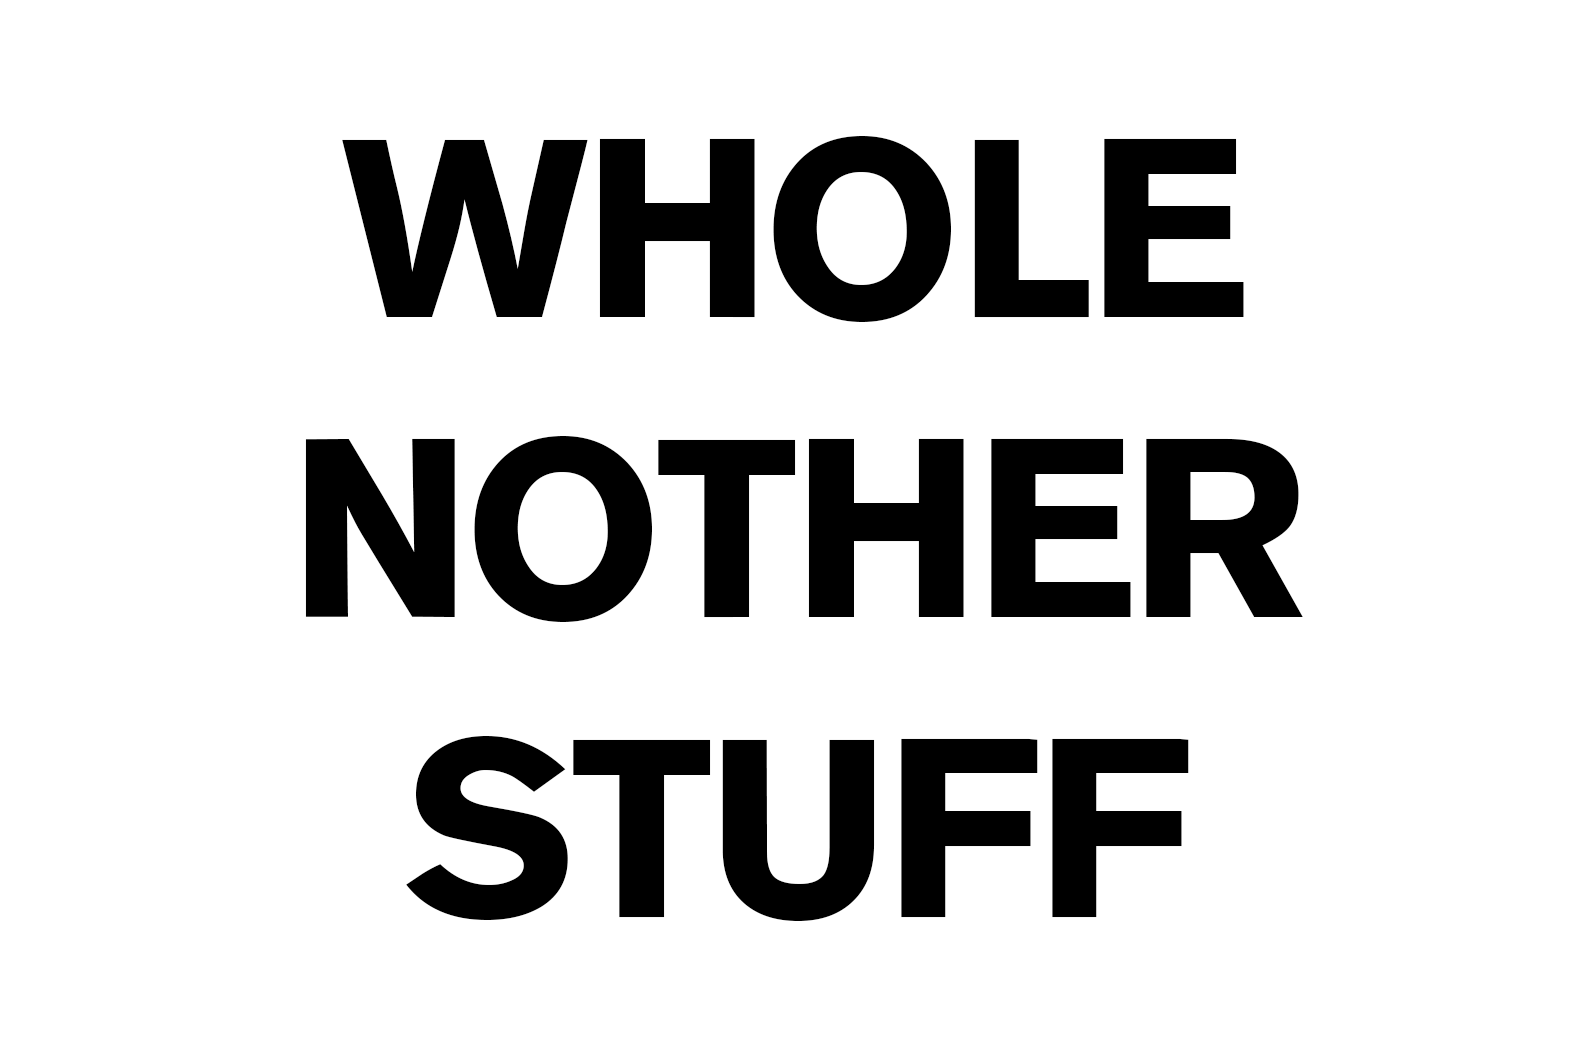 06-01 - WHOLE NOTHER STUFF - (2015,03,02)